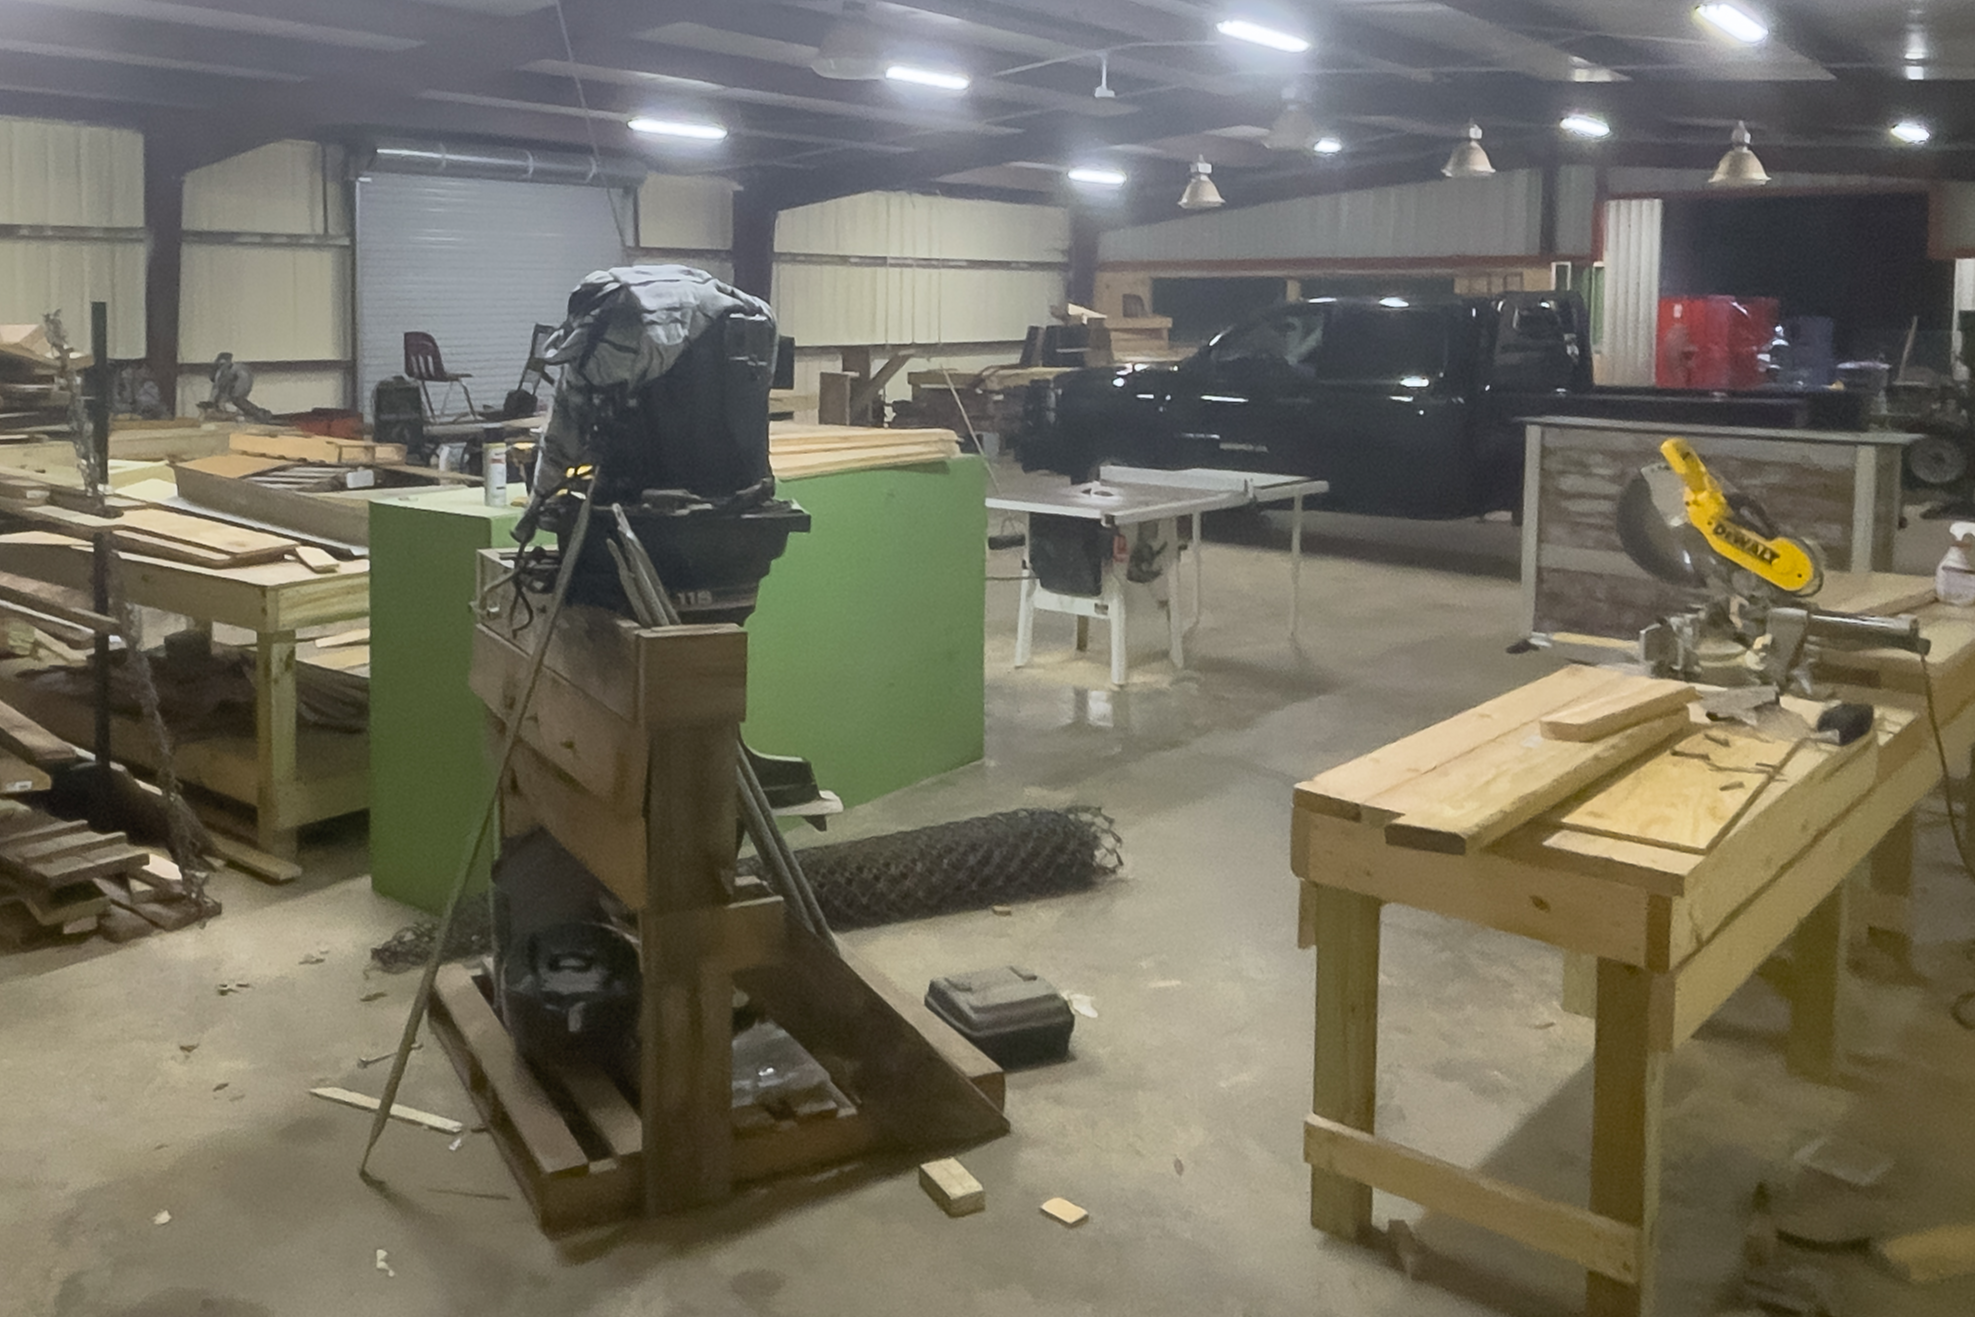 Agriculture Mechanics Shop with Metal and Woodworking Equipment and Projects